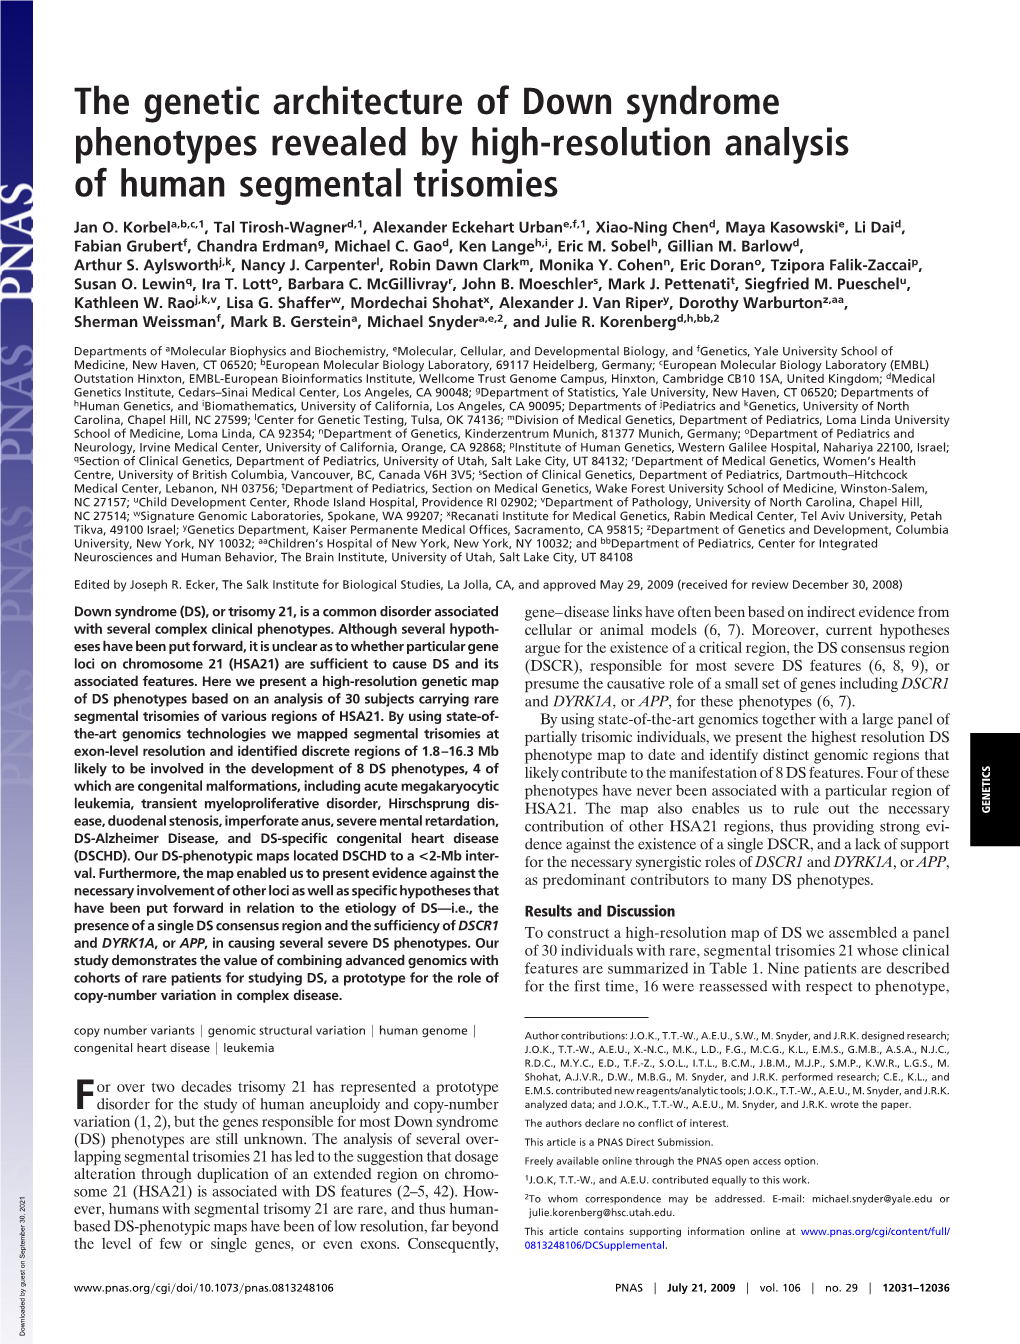 The Genetic Architecture of Down Syndrome Phenotypes Revealed by High-Resolution Analysis of Human Segmental Trisomies